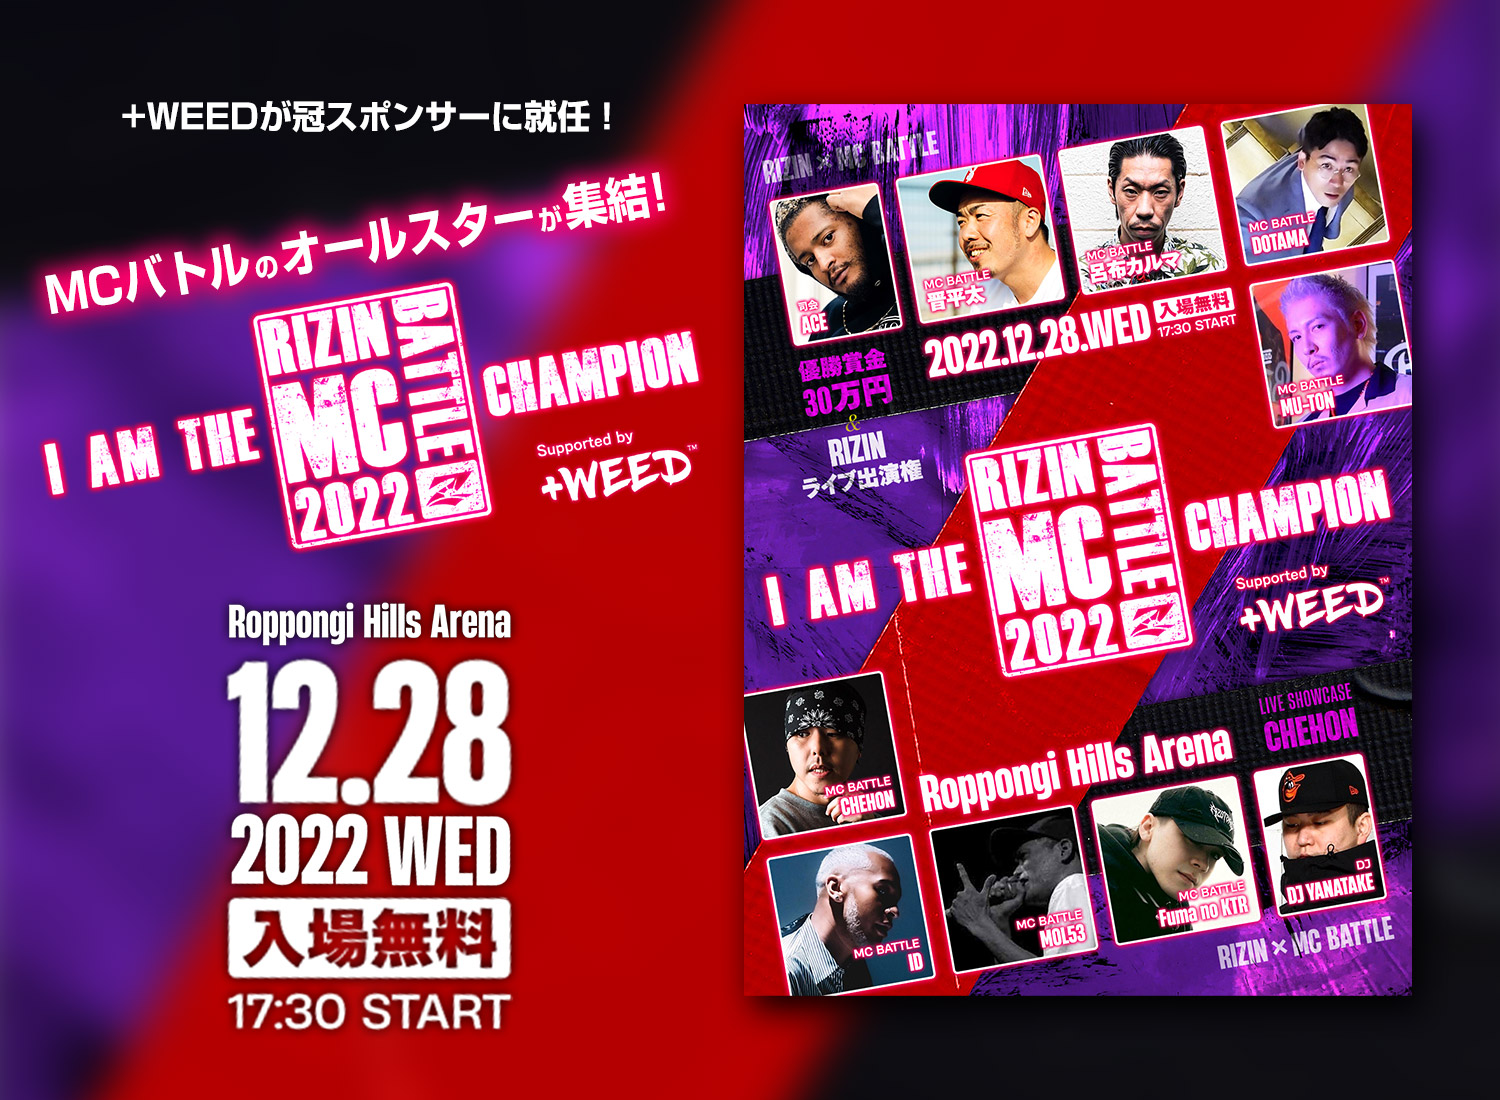 RIZIN MC BATTLE 2022 suported by +WEED